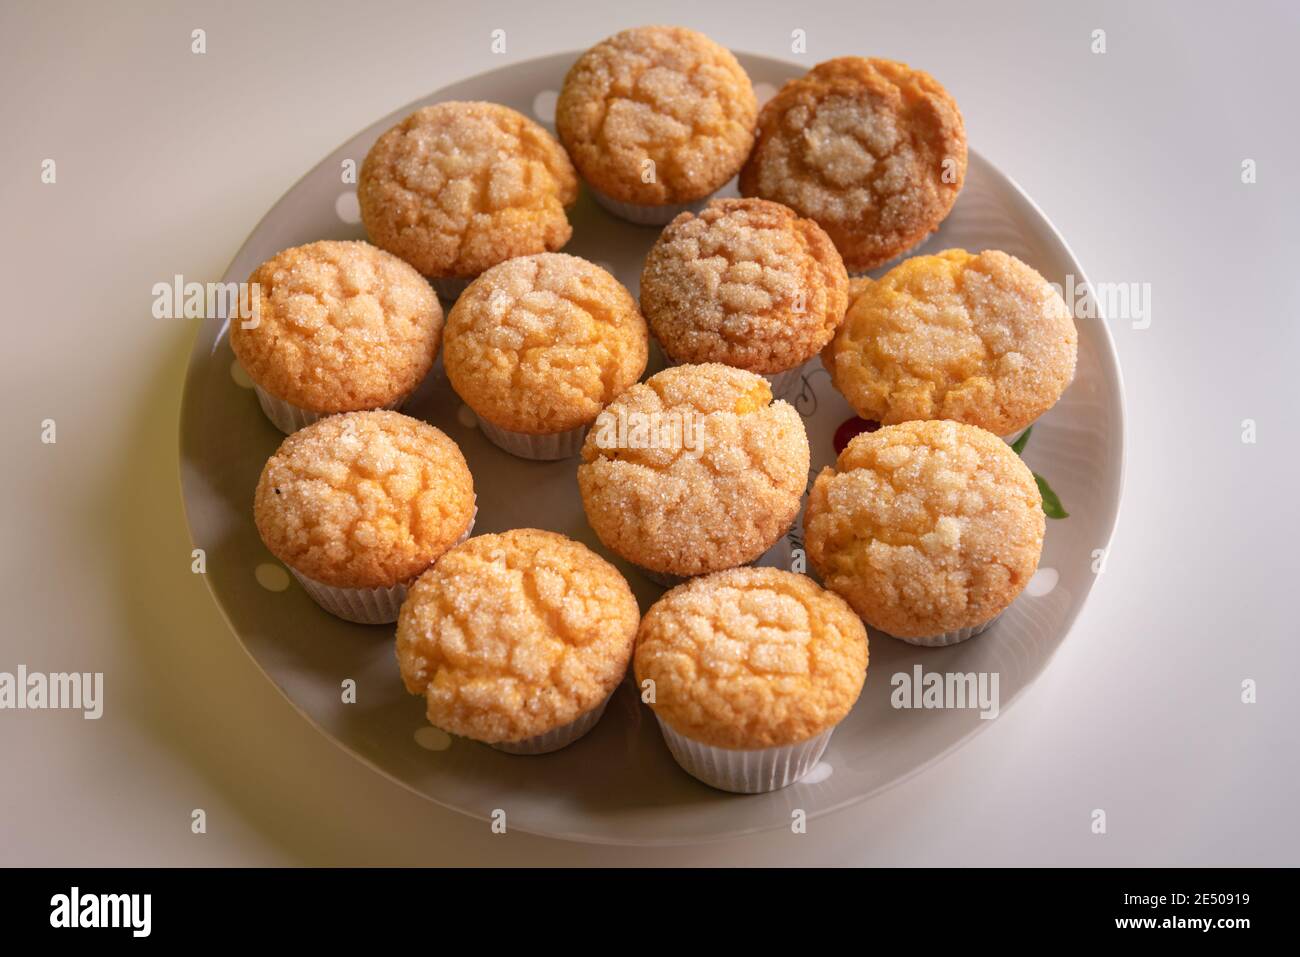 Home baked sugar coated muffins on a plate Stock Photo